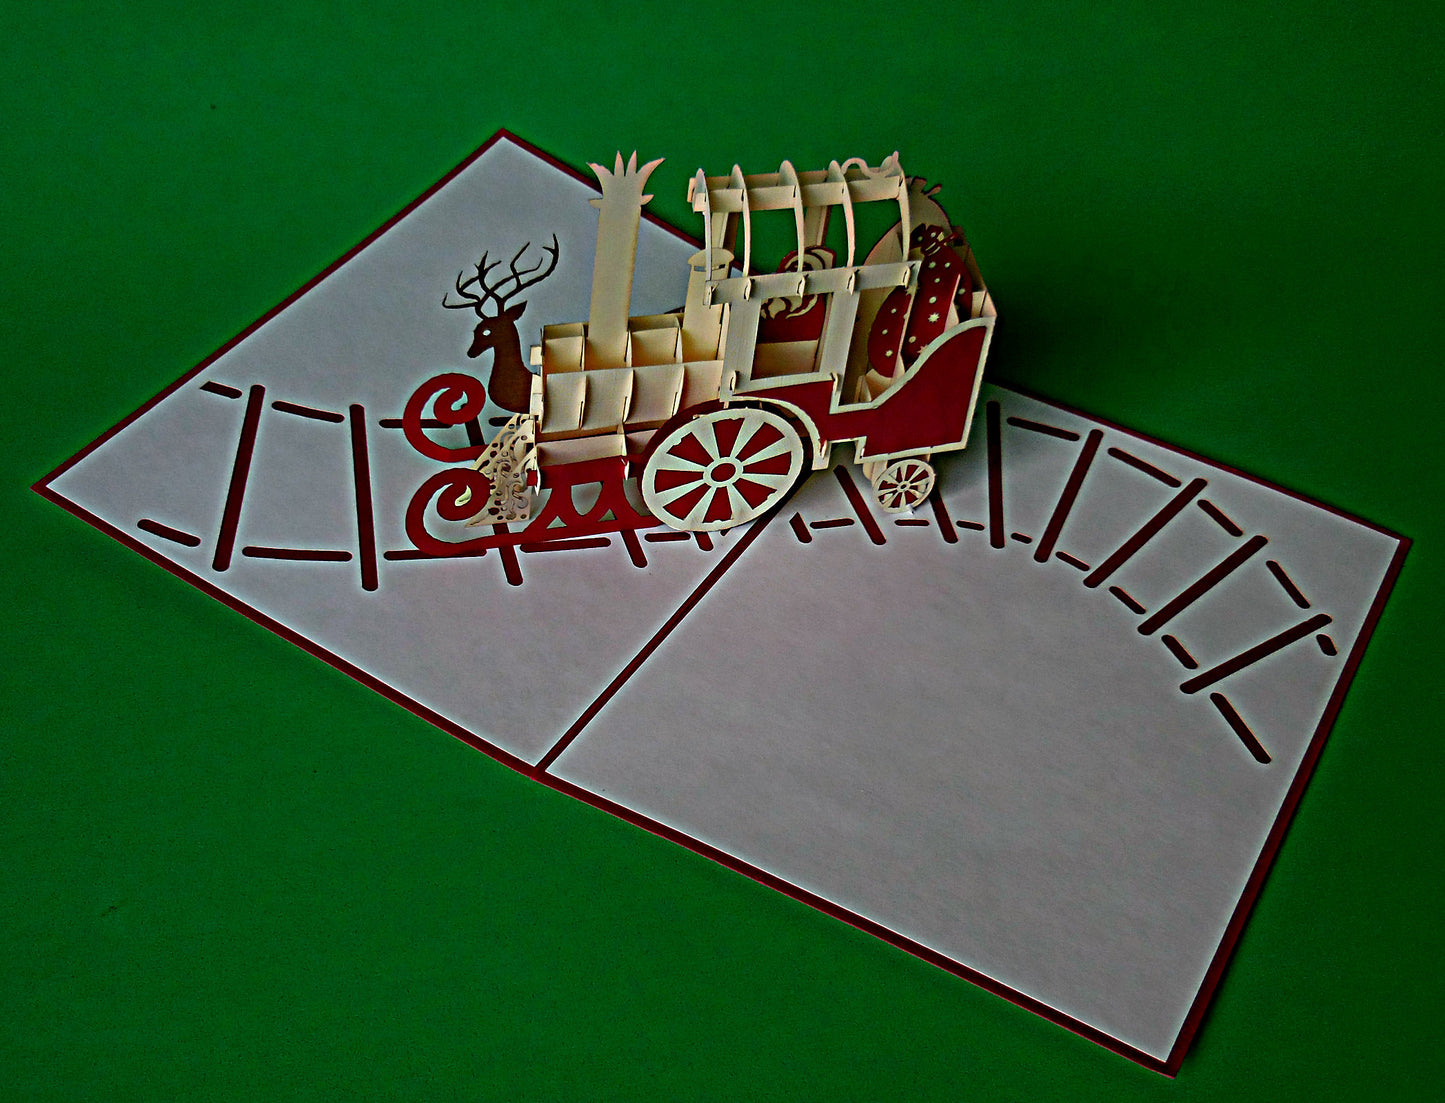 Holiday Train 3D Pop Up Greeting Card - Christmas - iGifts And Cards